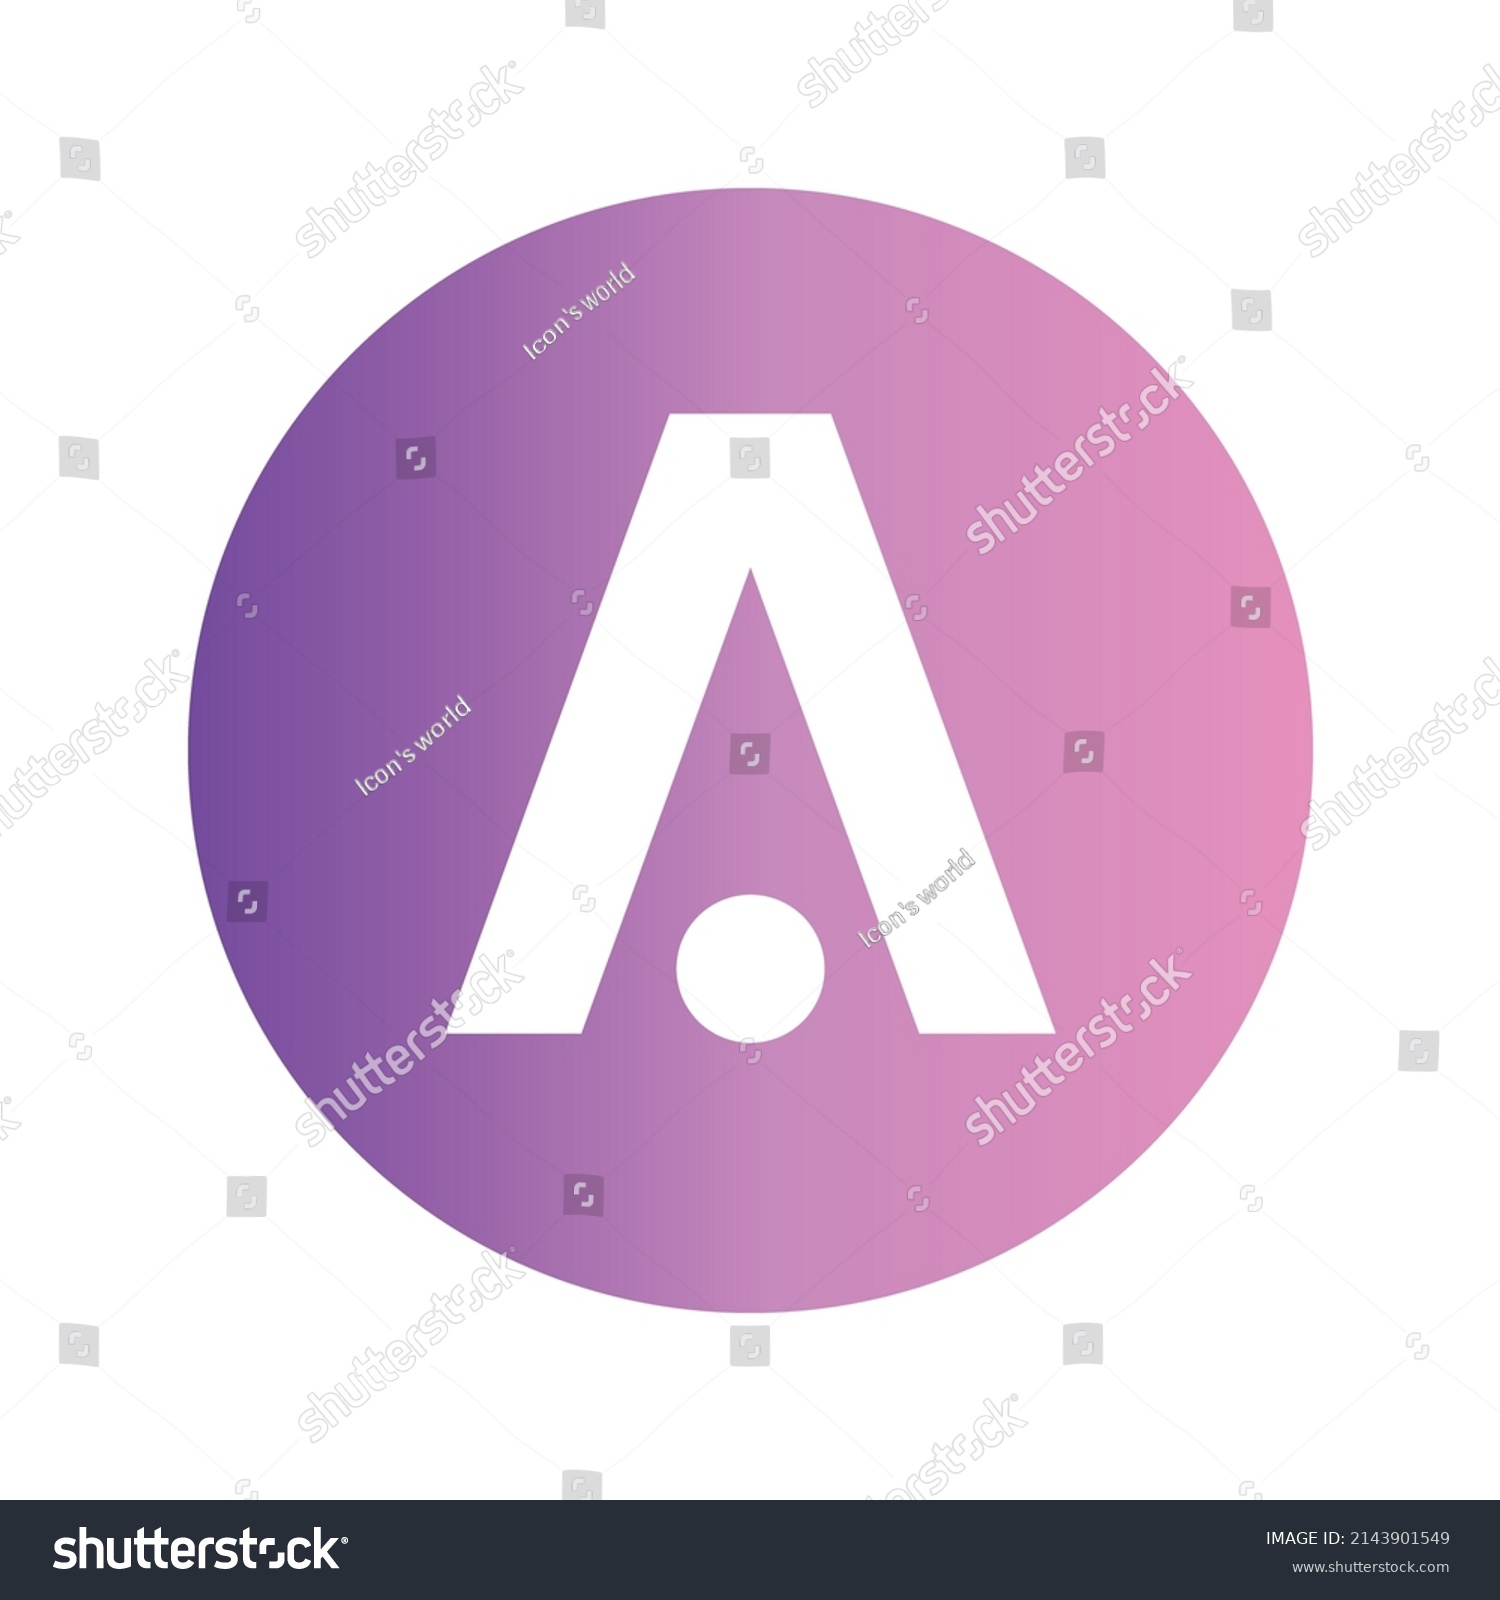 aion cryptocurrency symbol